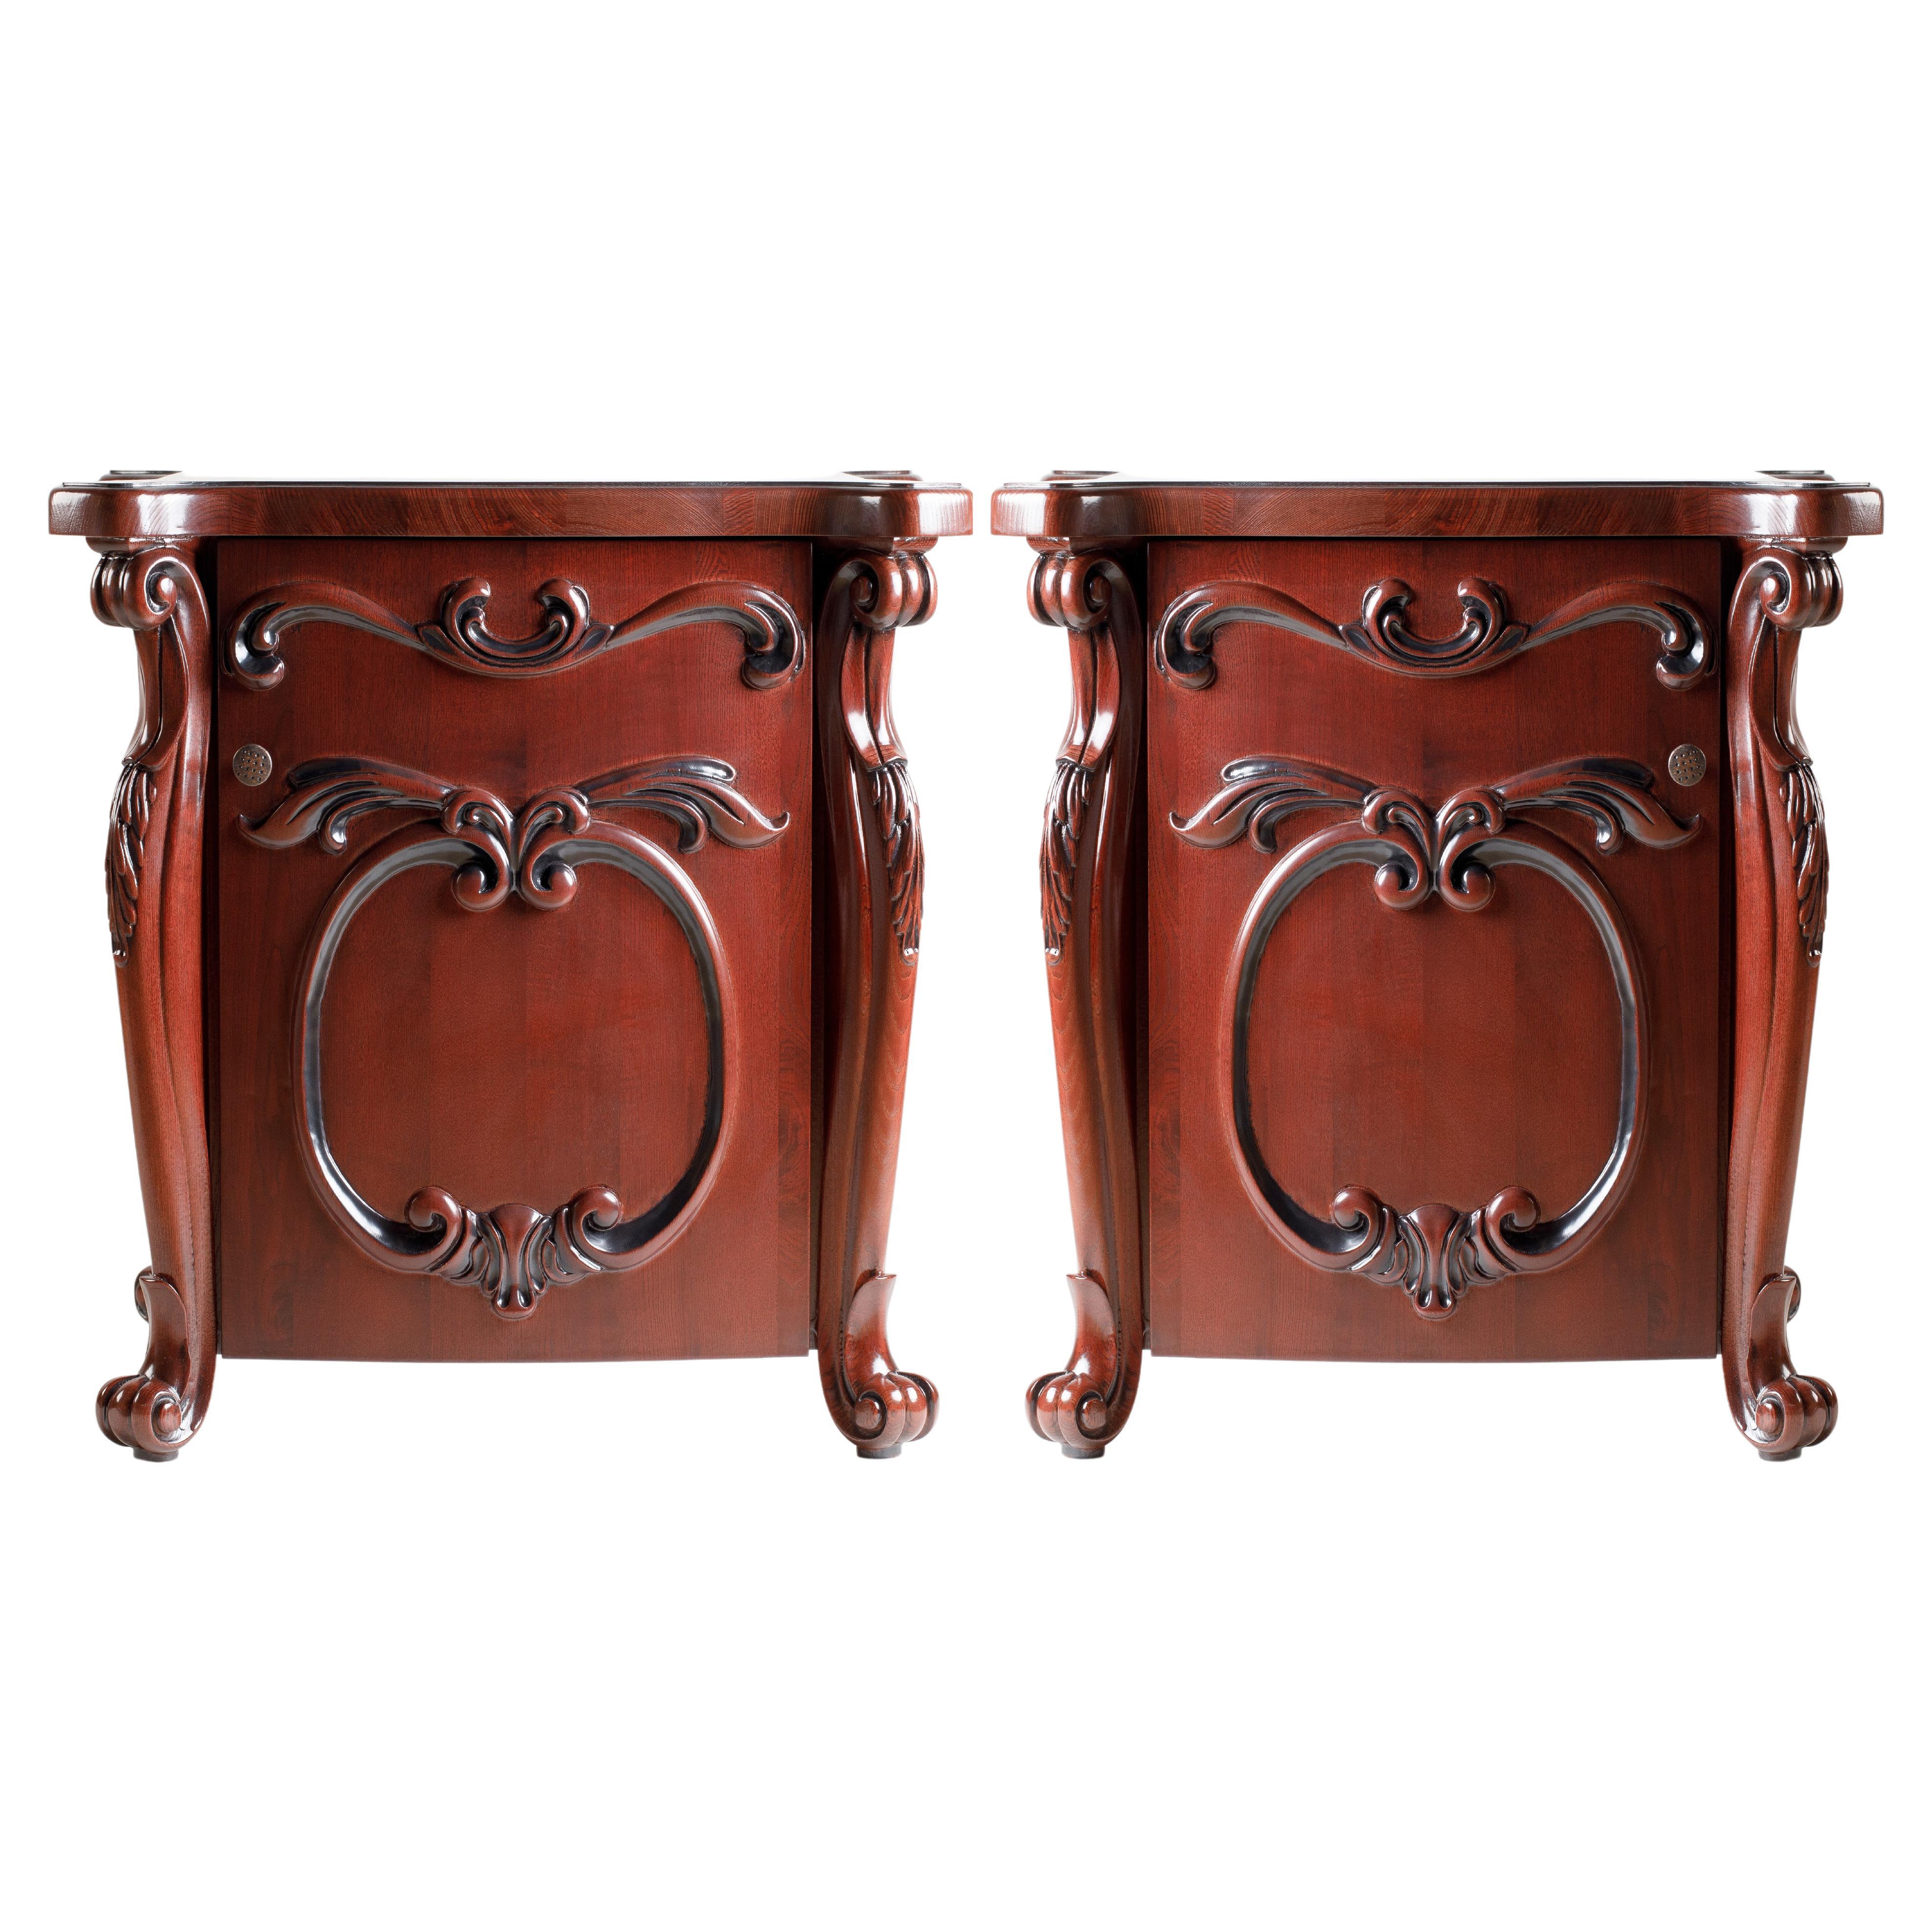 Rococo Style Carved Door Nightstands - A Pair